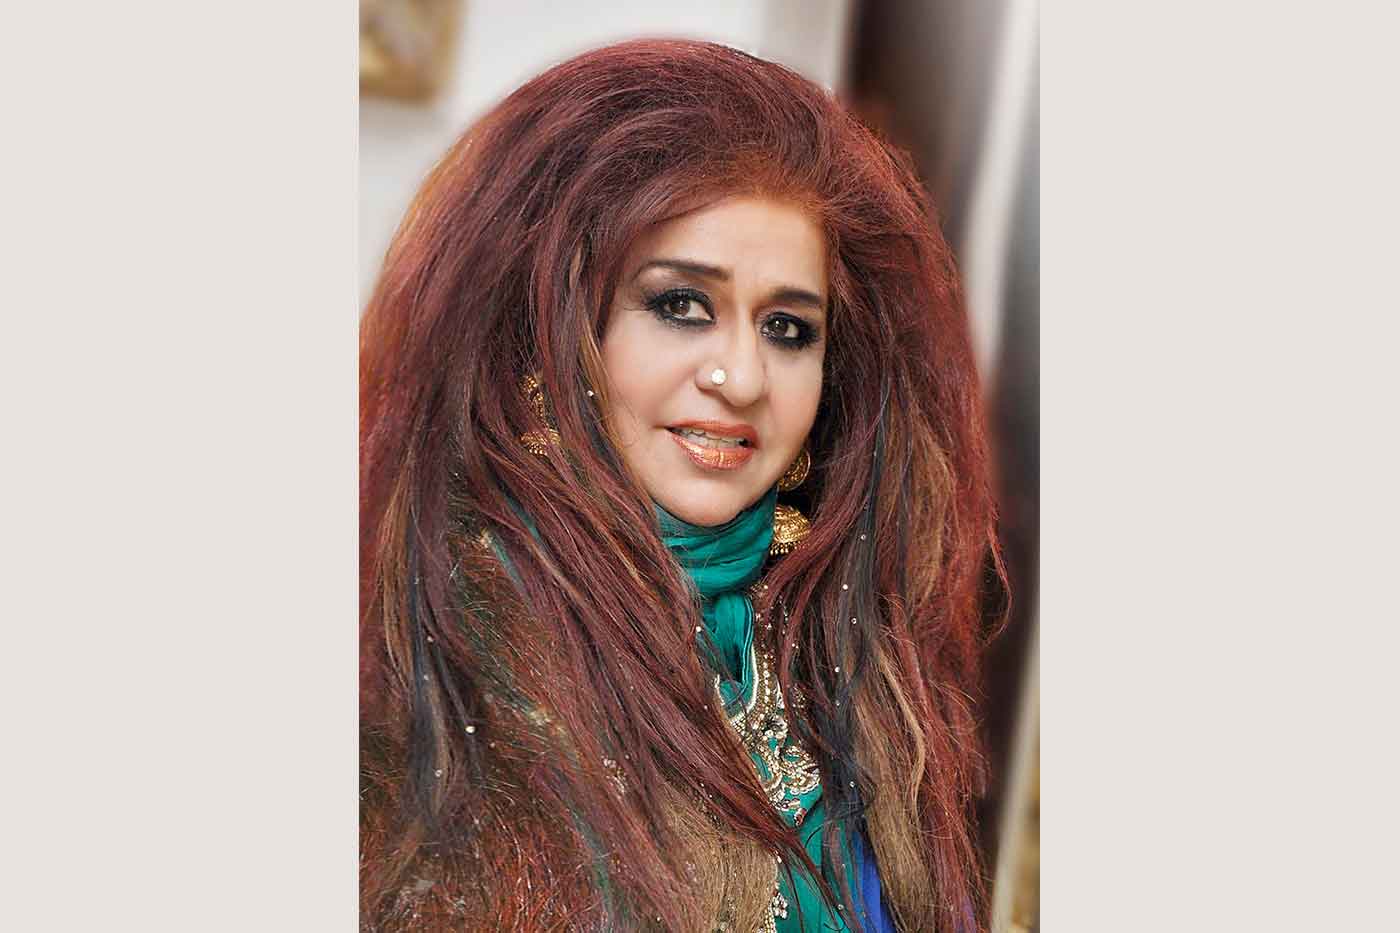 Shahnaz Husain adds herbal skincare range to the product lineup